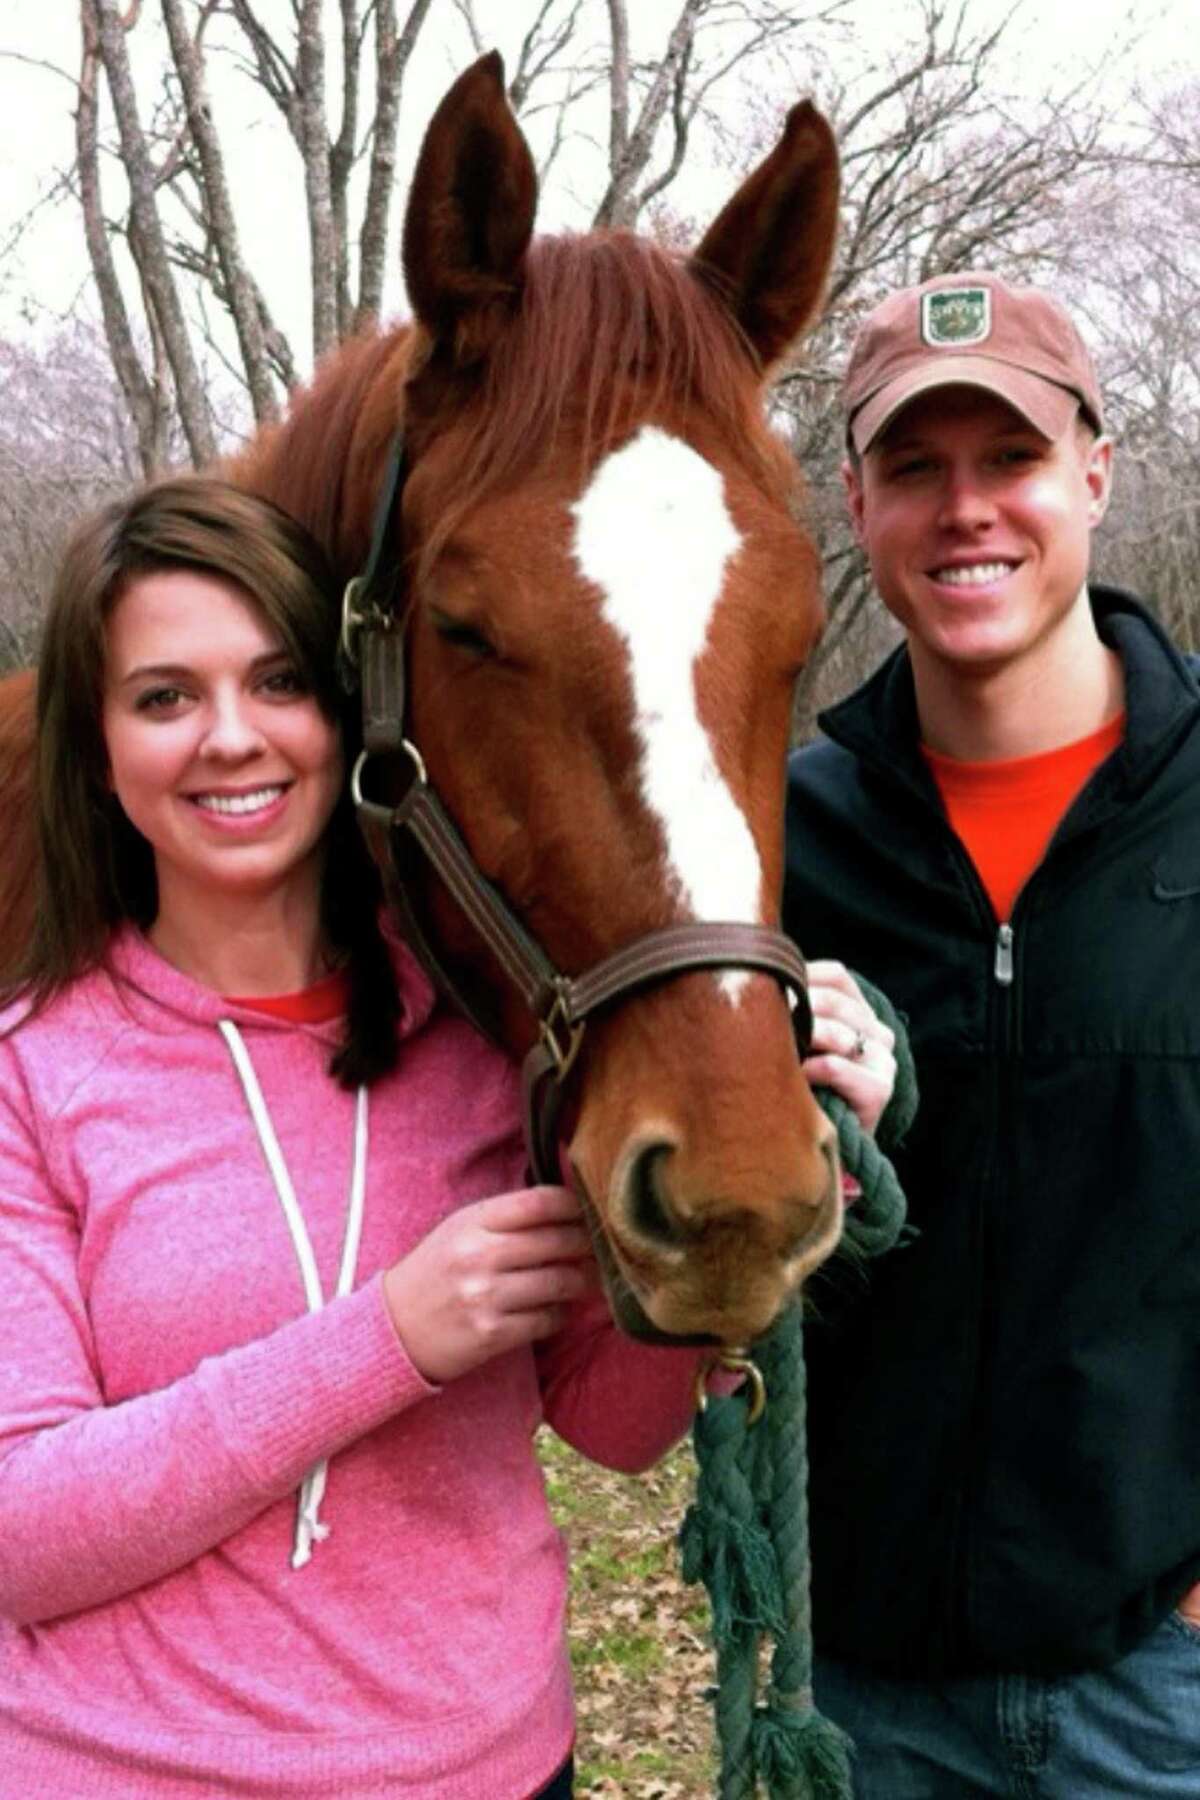 Rebecca and Ian Morrison with the horse he bought after thinking of his wife’s love of the animals. “He was really quiet except when he was around me,” Rebecca said of her husband.